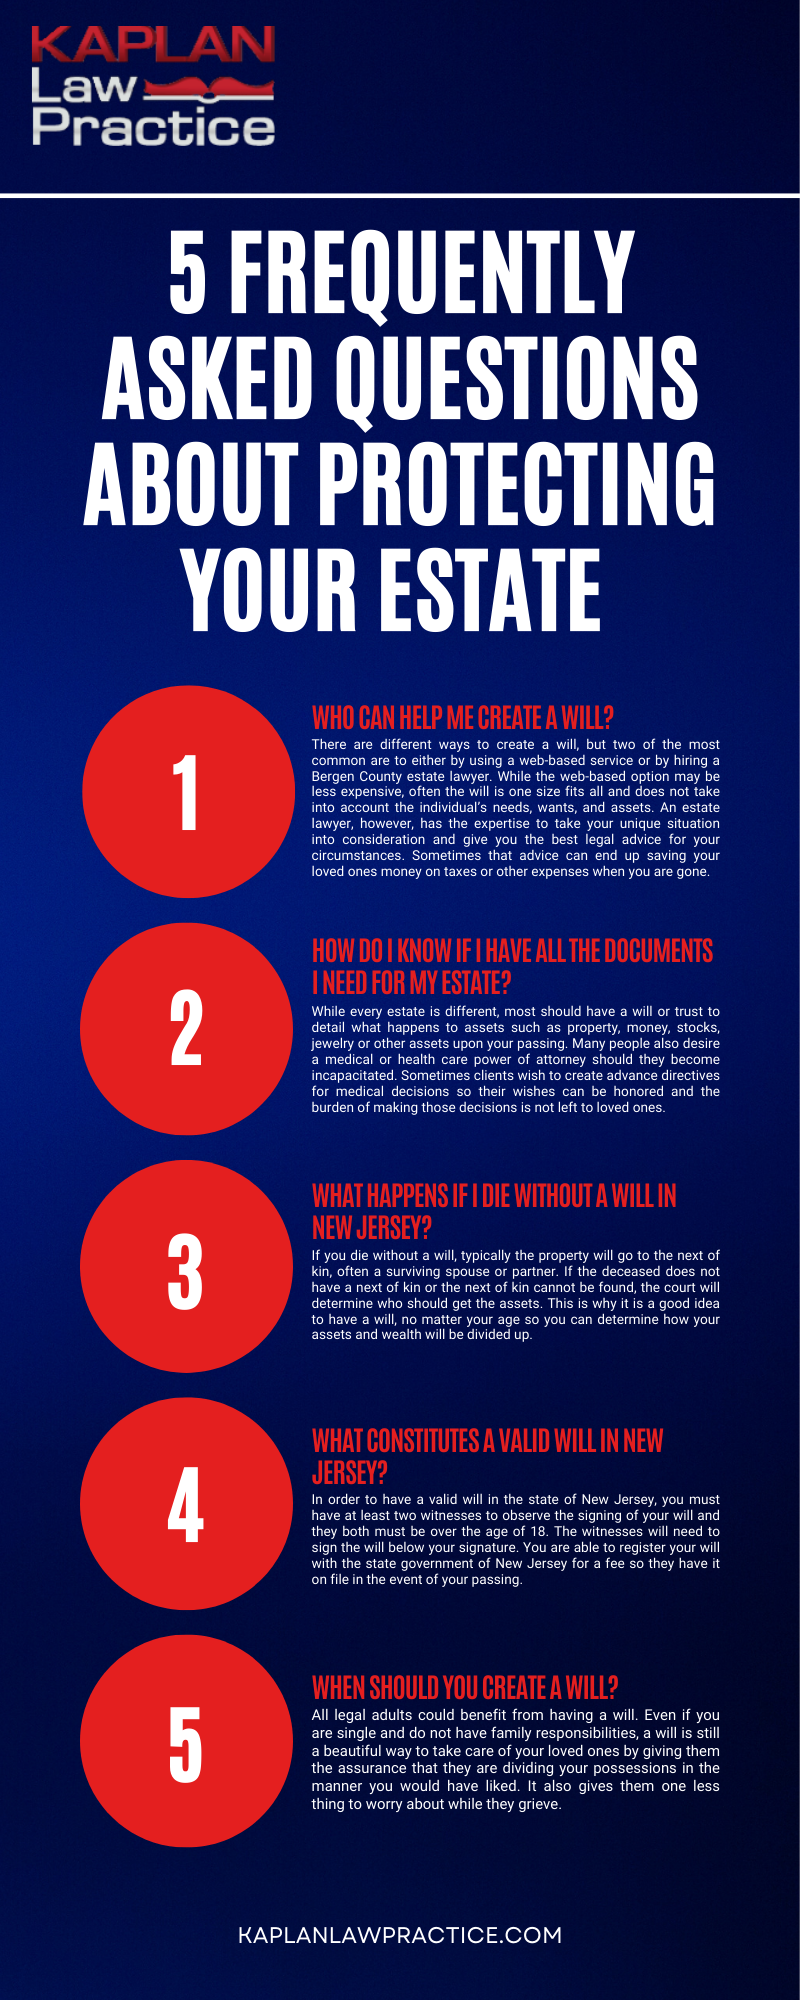 5 FREQUENTLY ASKED QUESTIONS ABOUT PROTECTING YOUR ESTATE INFOGRAPHIC